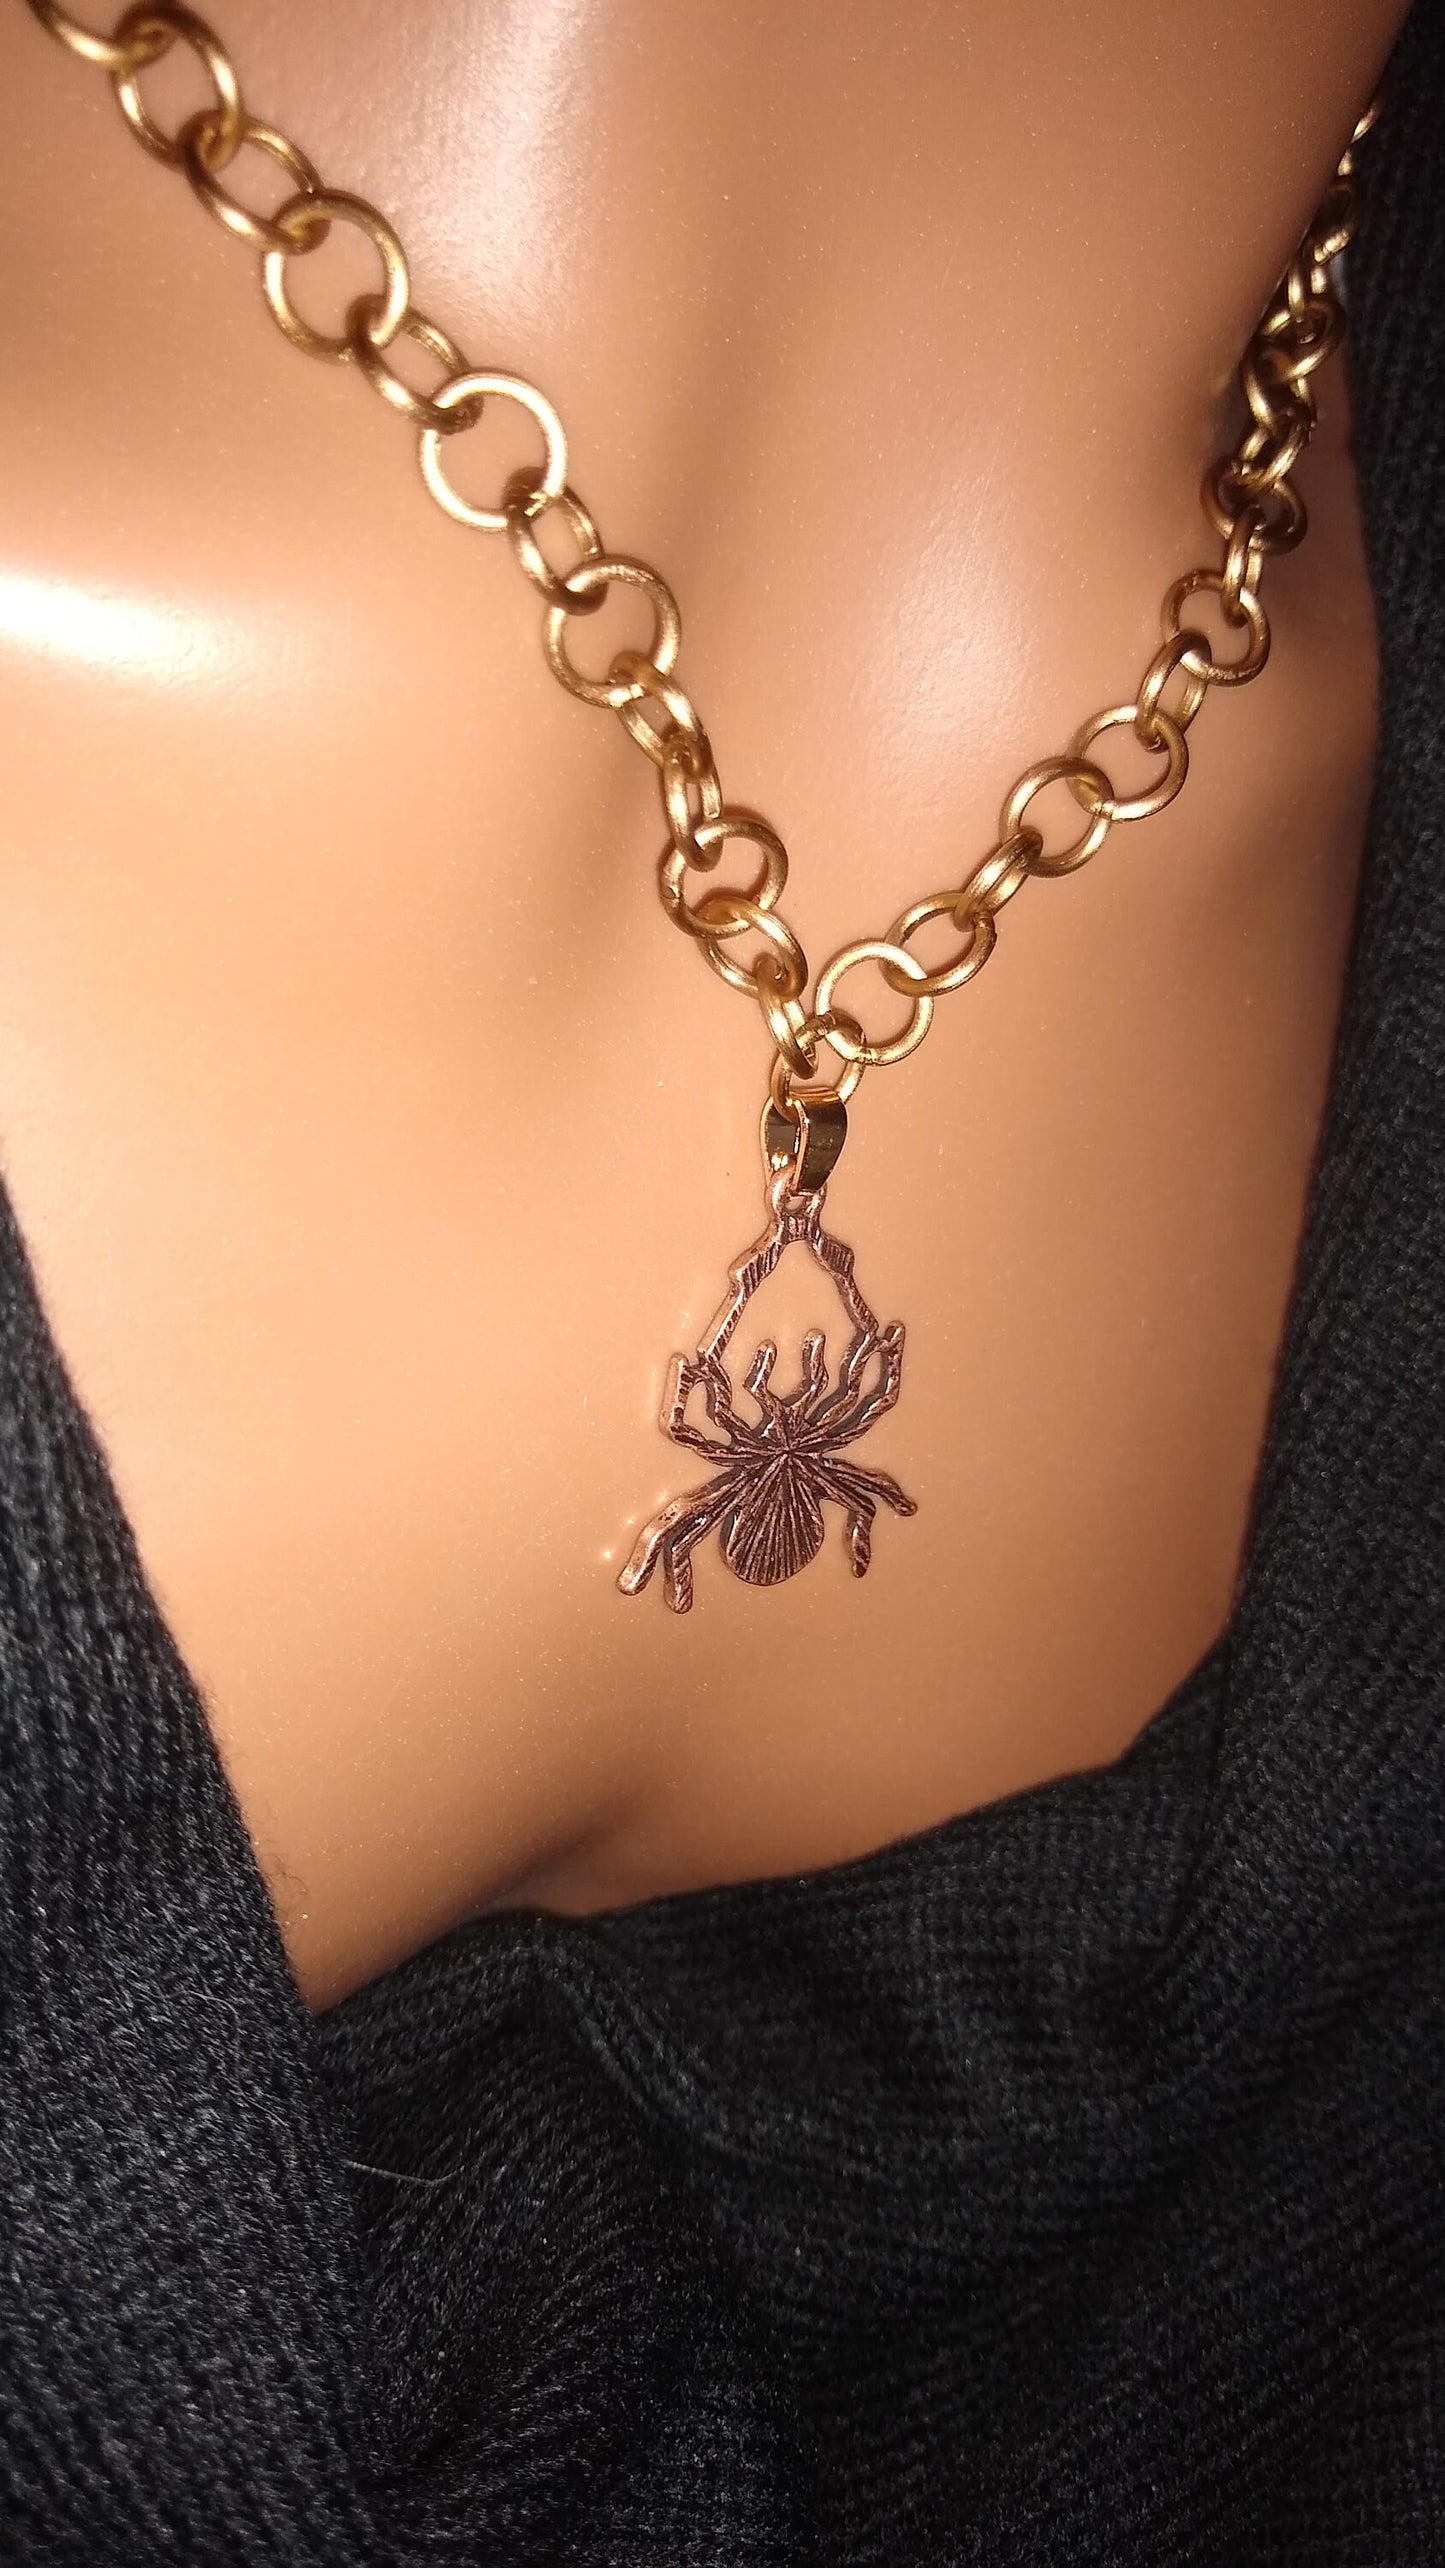 Spider copper necklace / spider pendant / long copper chain necklace / Halloween jewelry /  gift for man / gift for boyfriend / mens jewelry